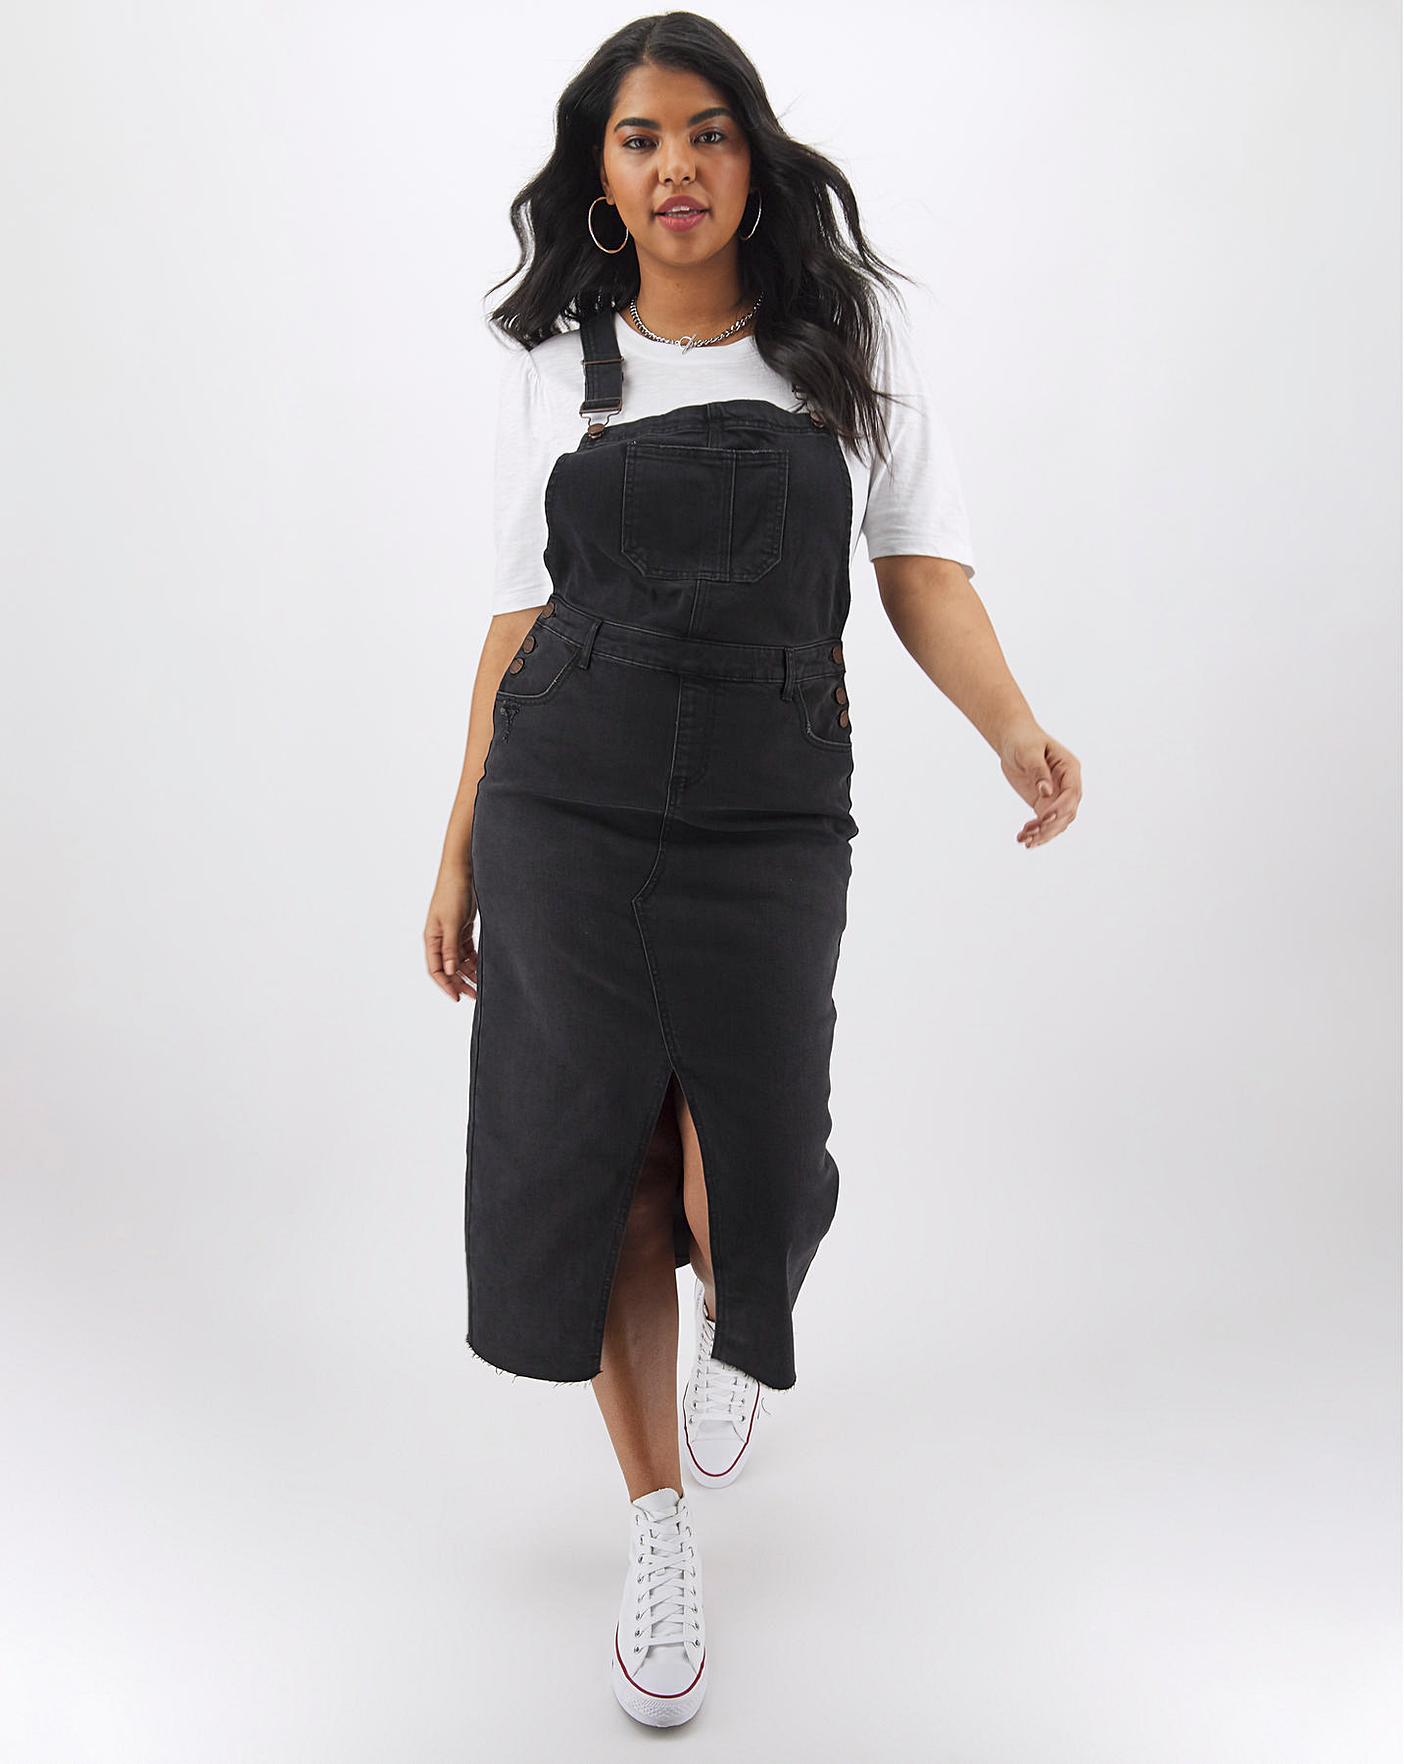 dungaree traditional dresses